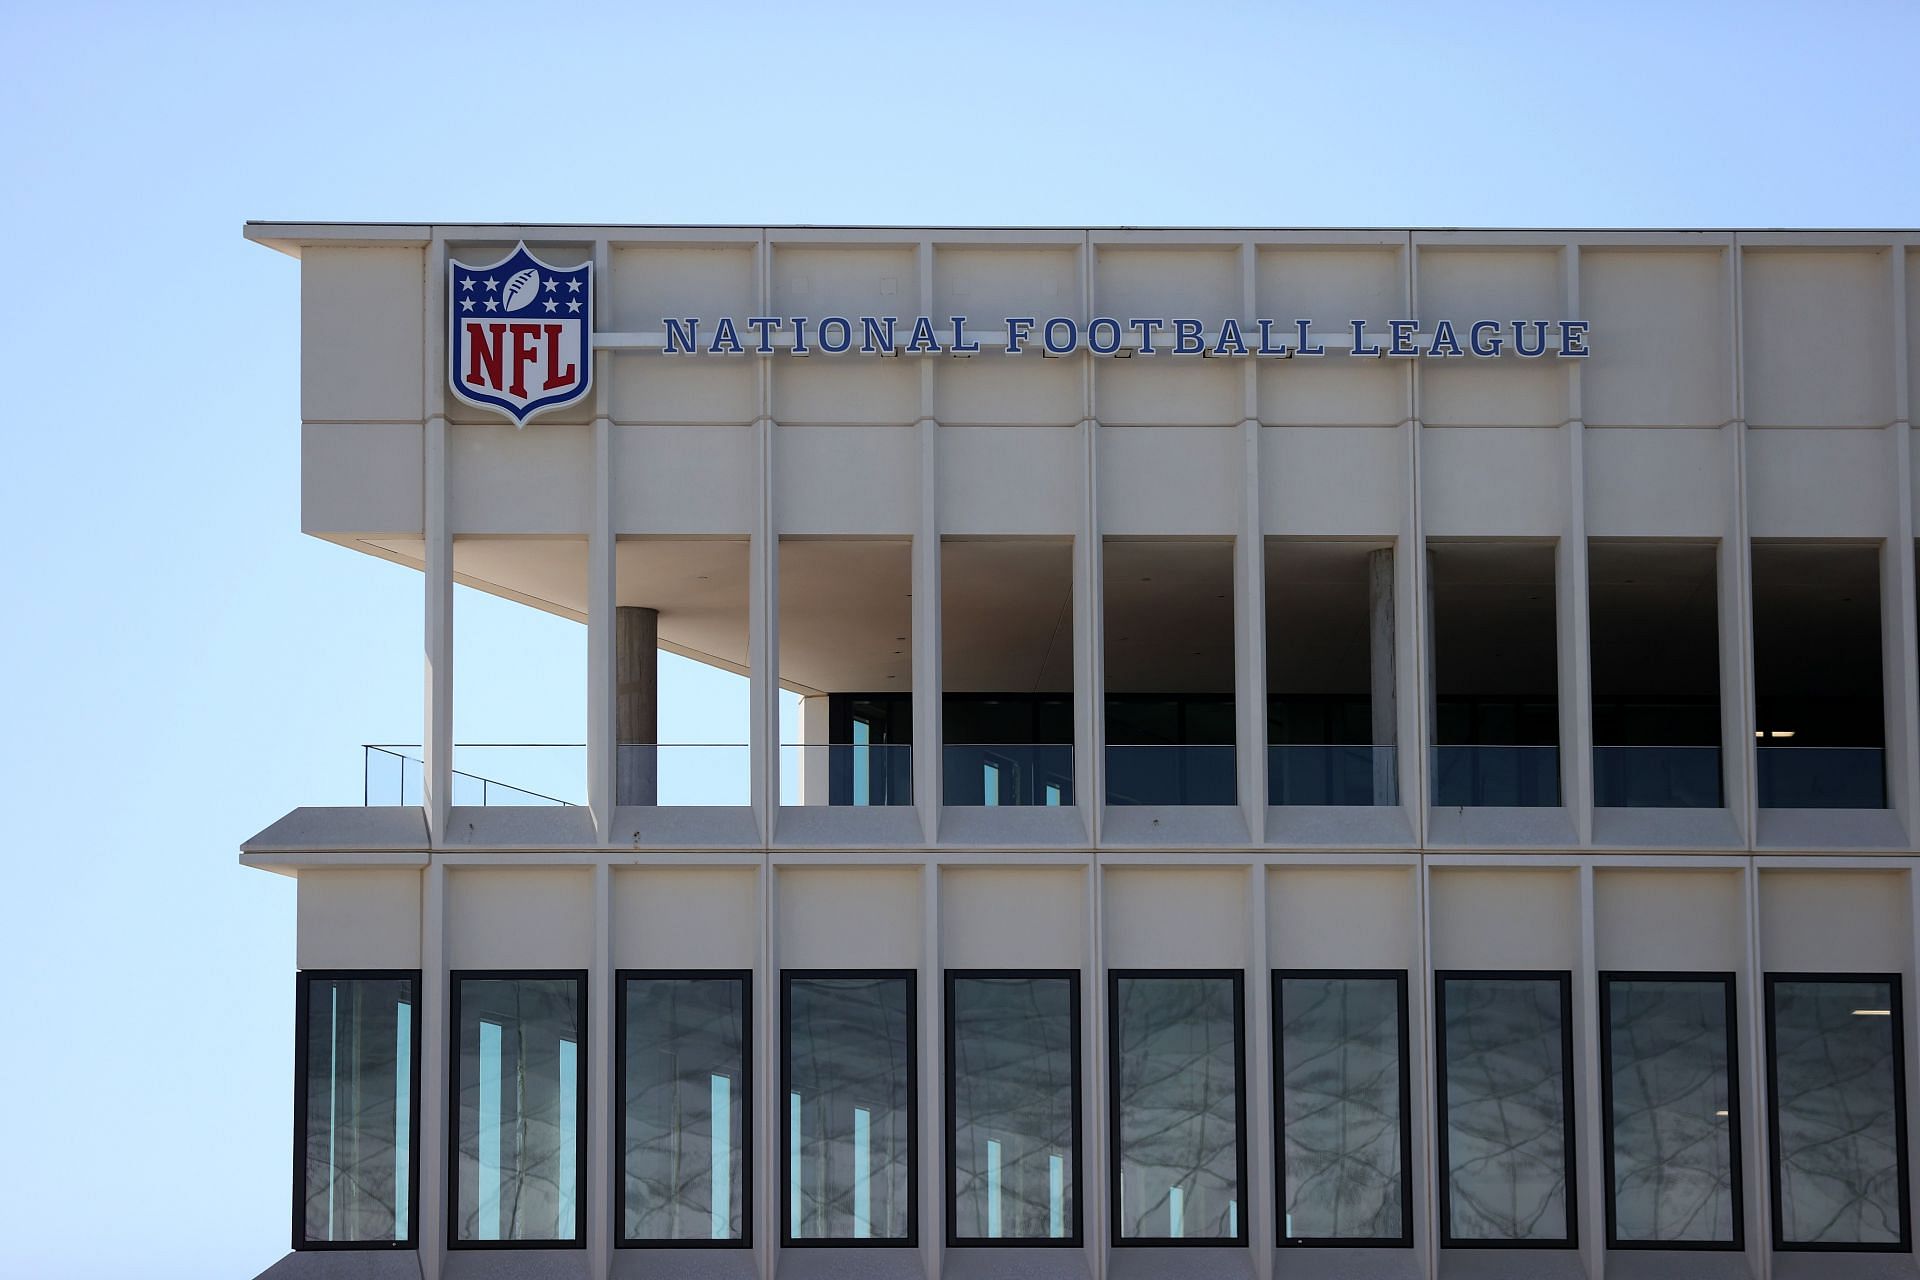 NFL logo prominently featured on quality piece of engineering